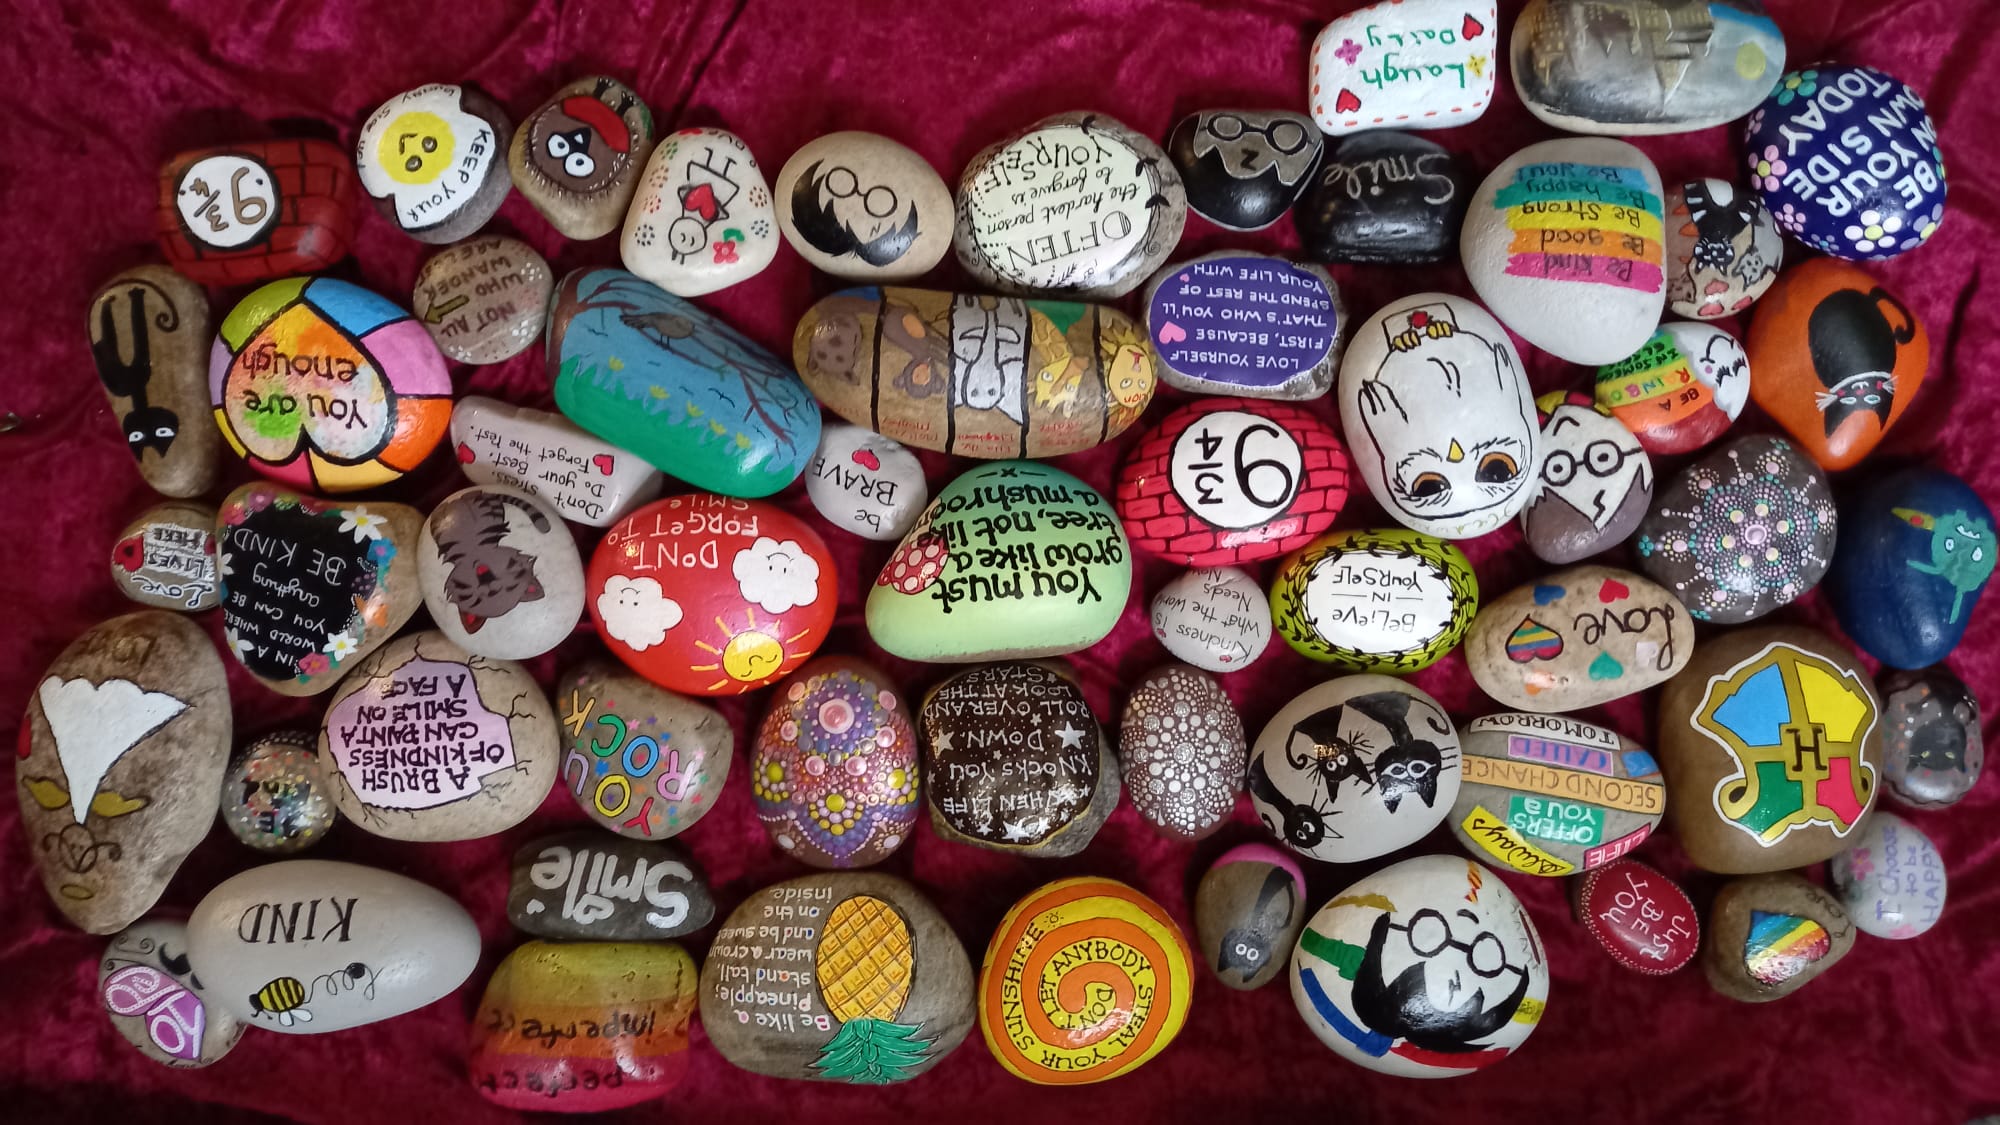 Free-Style Rock Painting